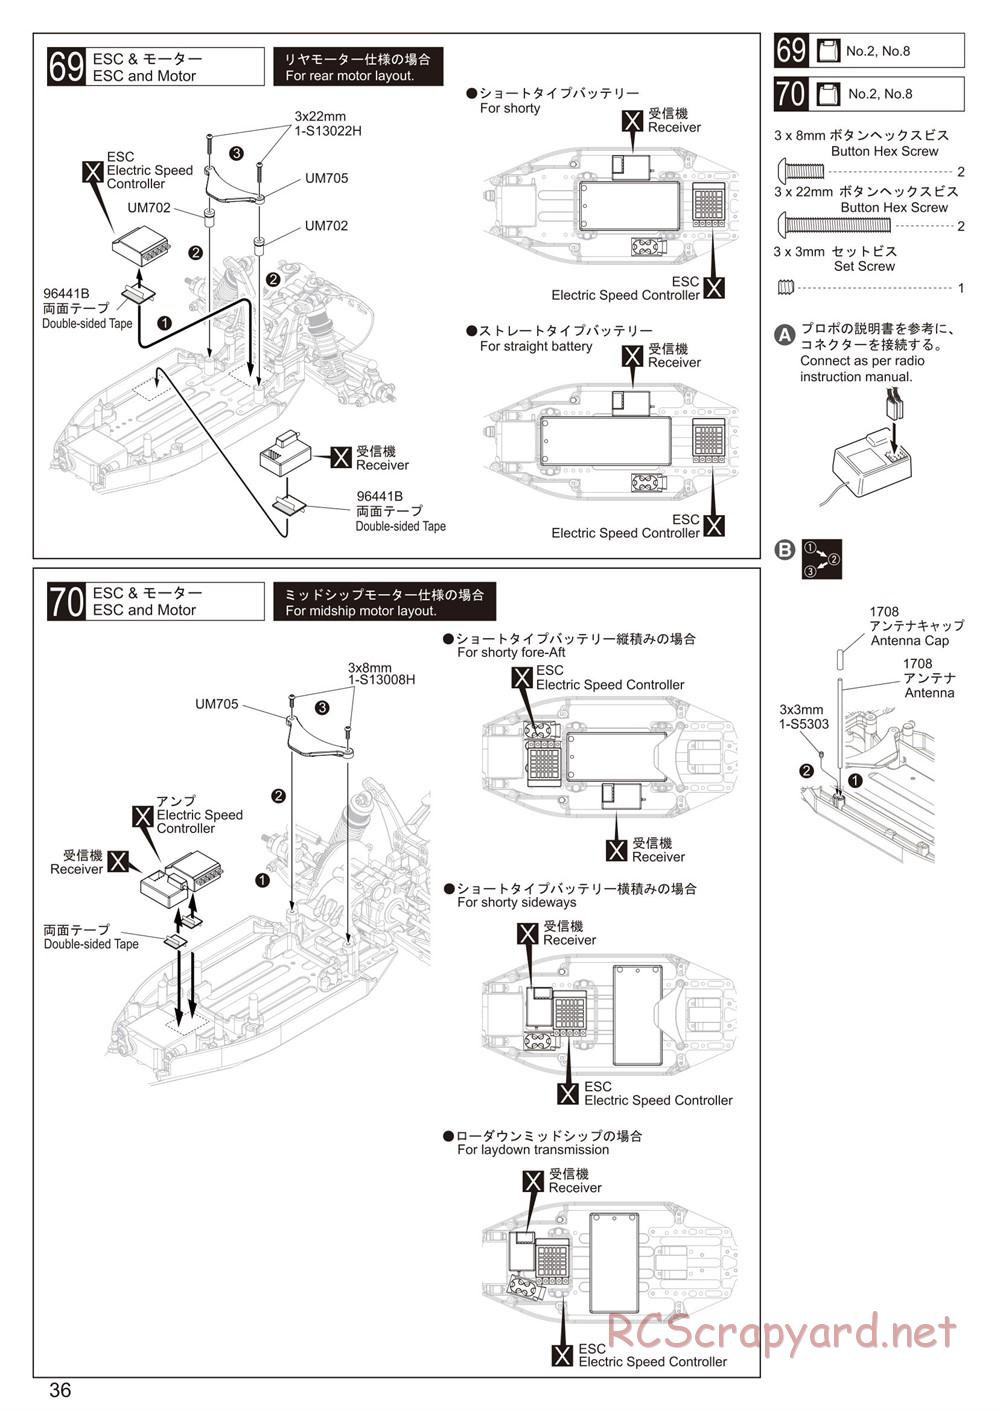 Kyosho - Ultima RB6.6 - Manual - Page 36